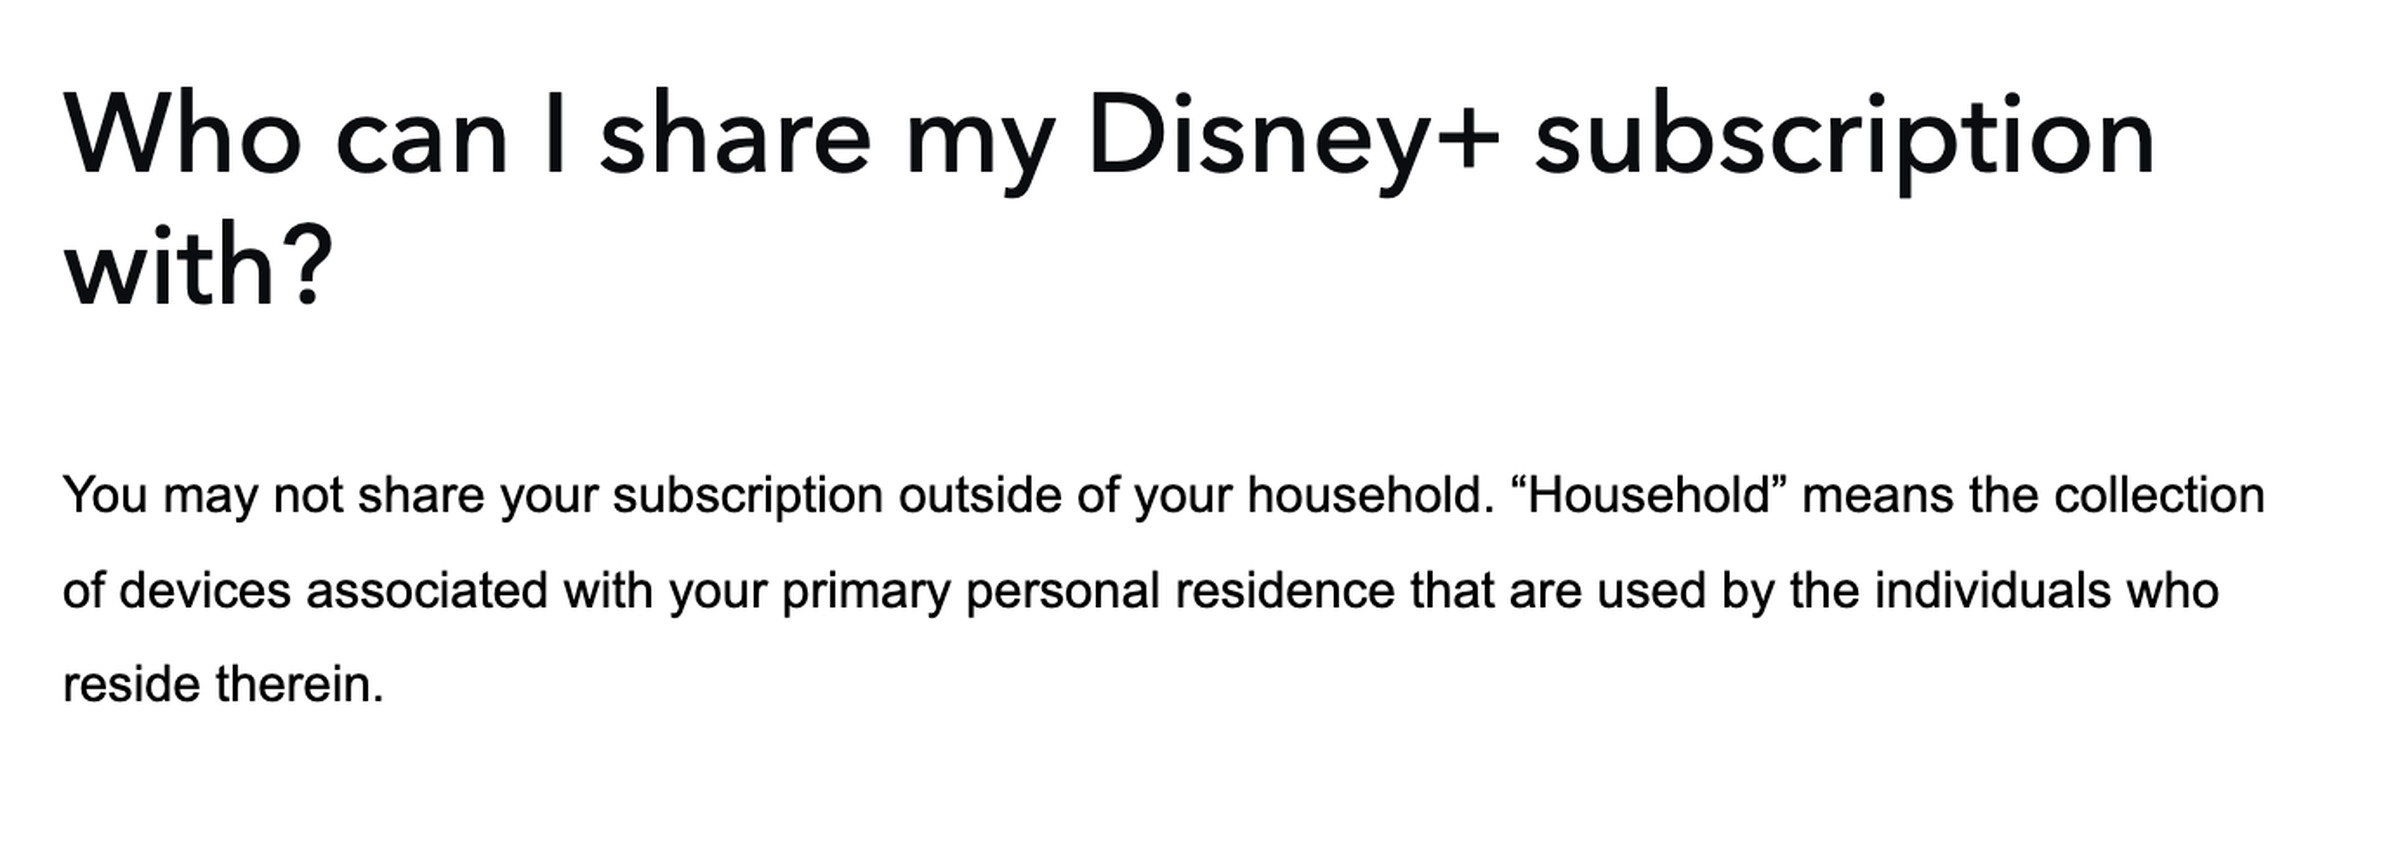 Text reads: Who can I share my Disney Plus subscription with? You may not share your subscription outside of your household. Household means the collection of devices associated with your primary personal residence that are used by the individuals who reside therein.